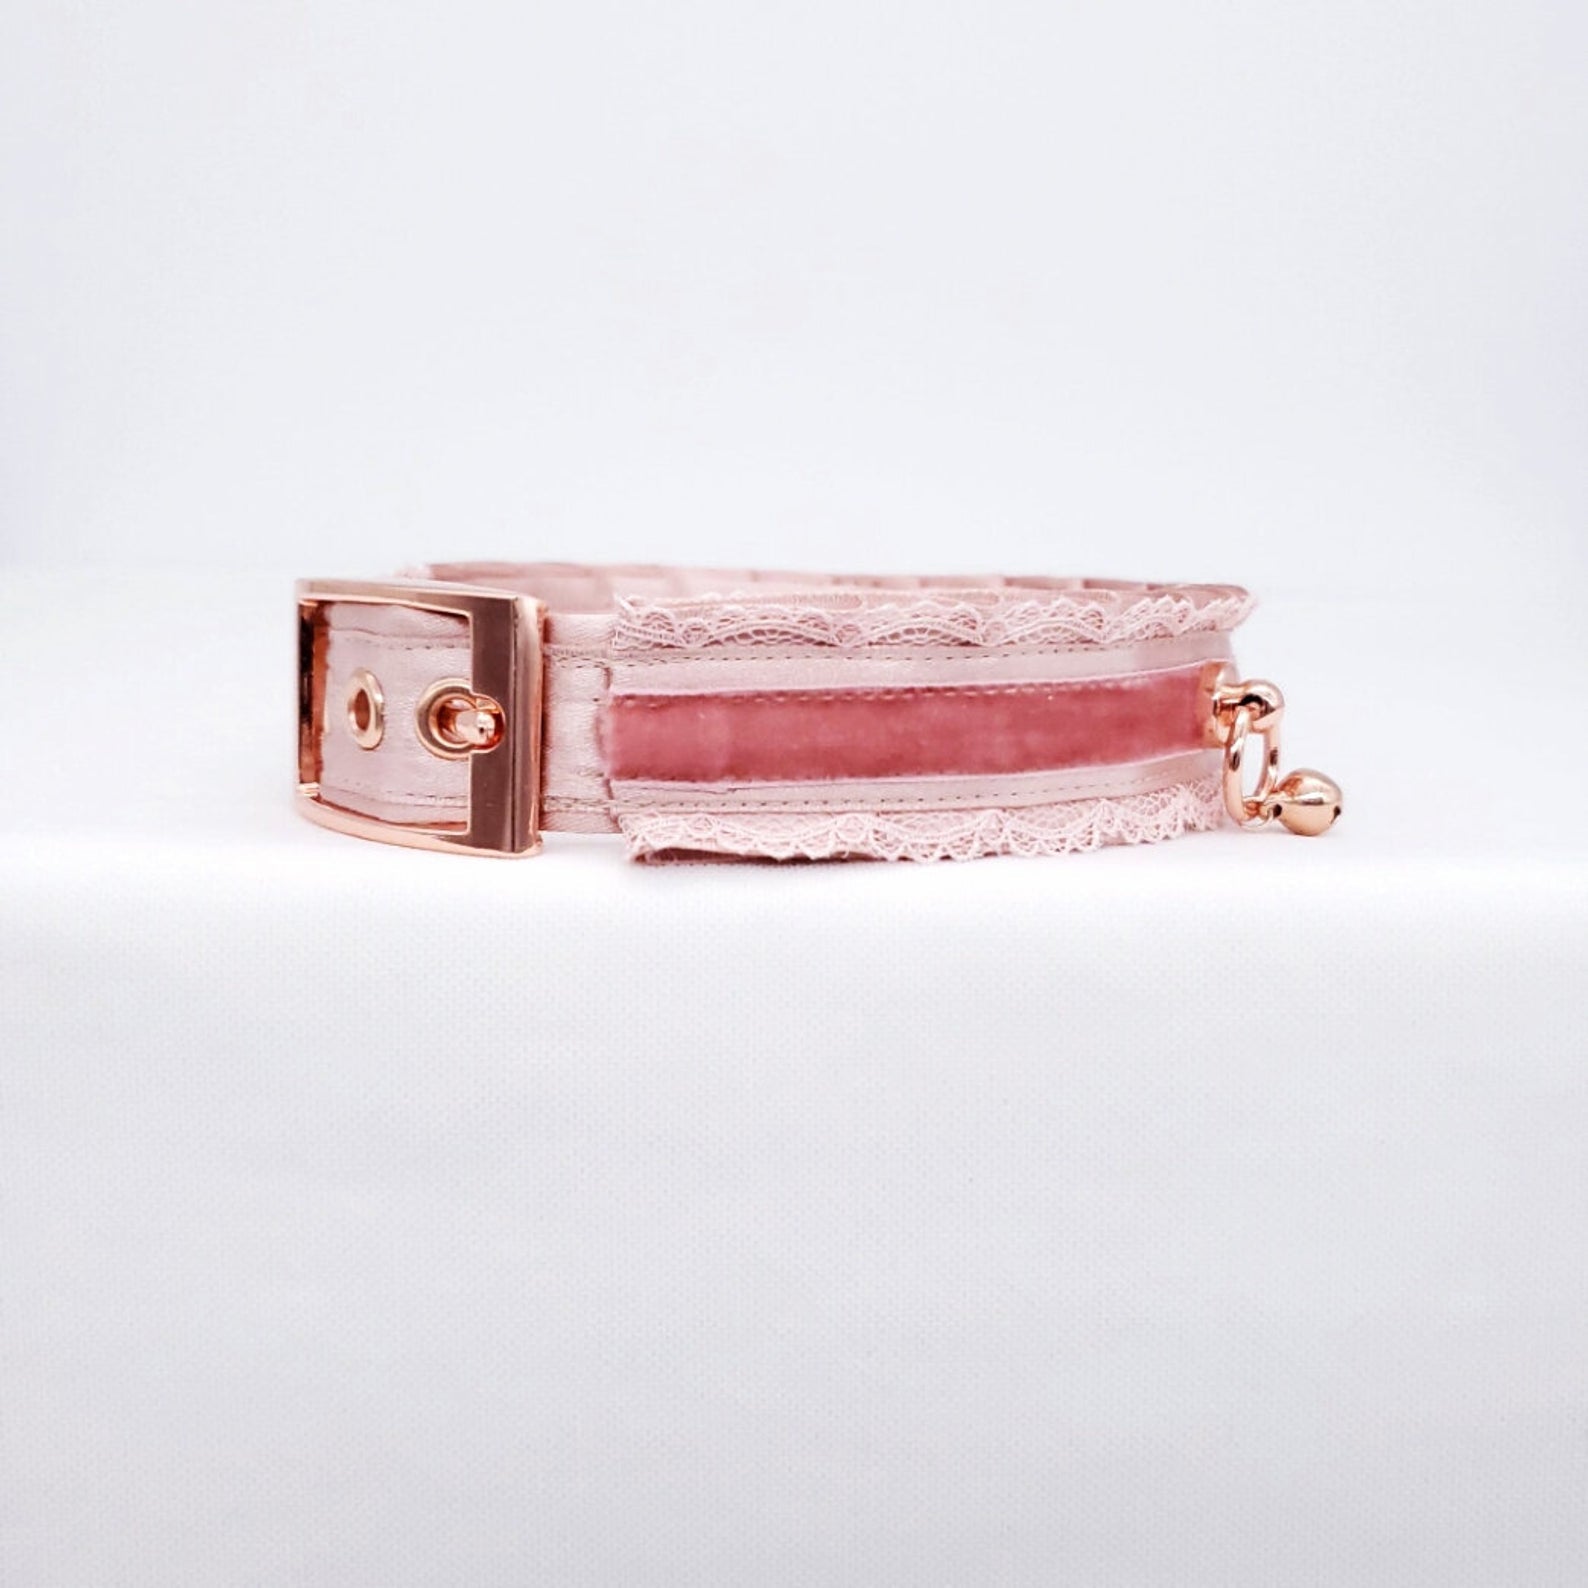 Blush Velvet, Lace and Crystals - Rose Gold Luxury Pet Play Collar